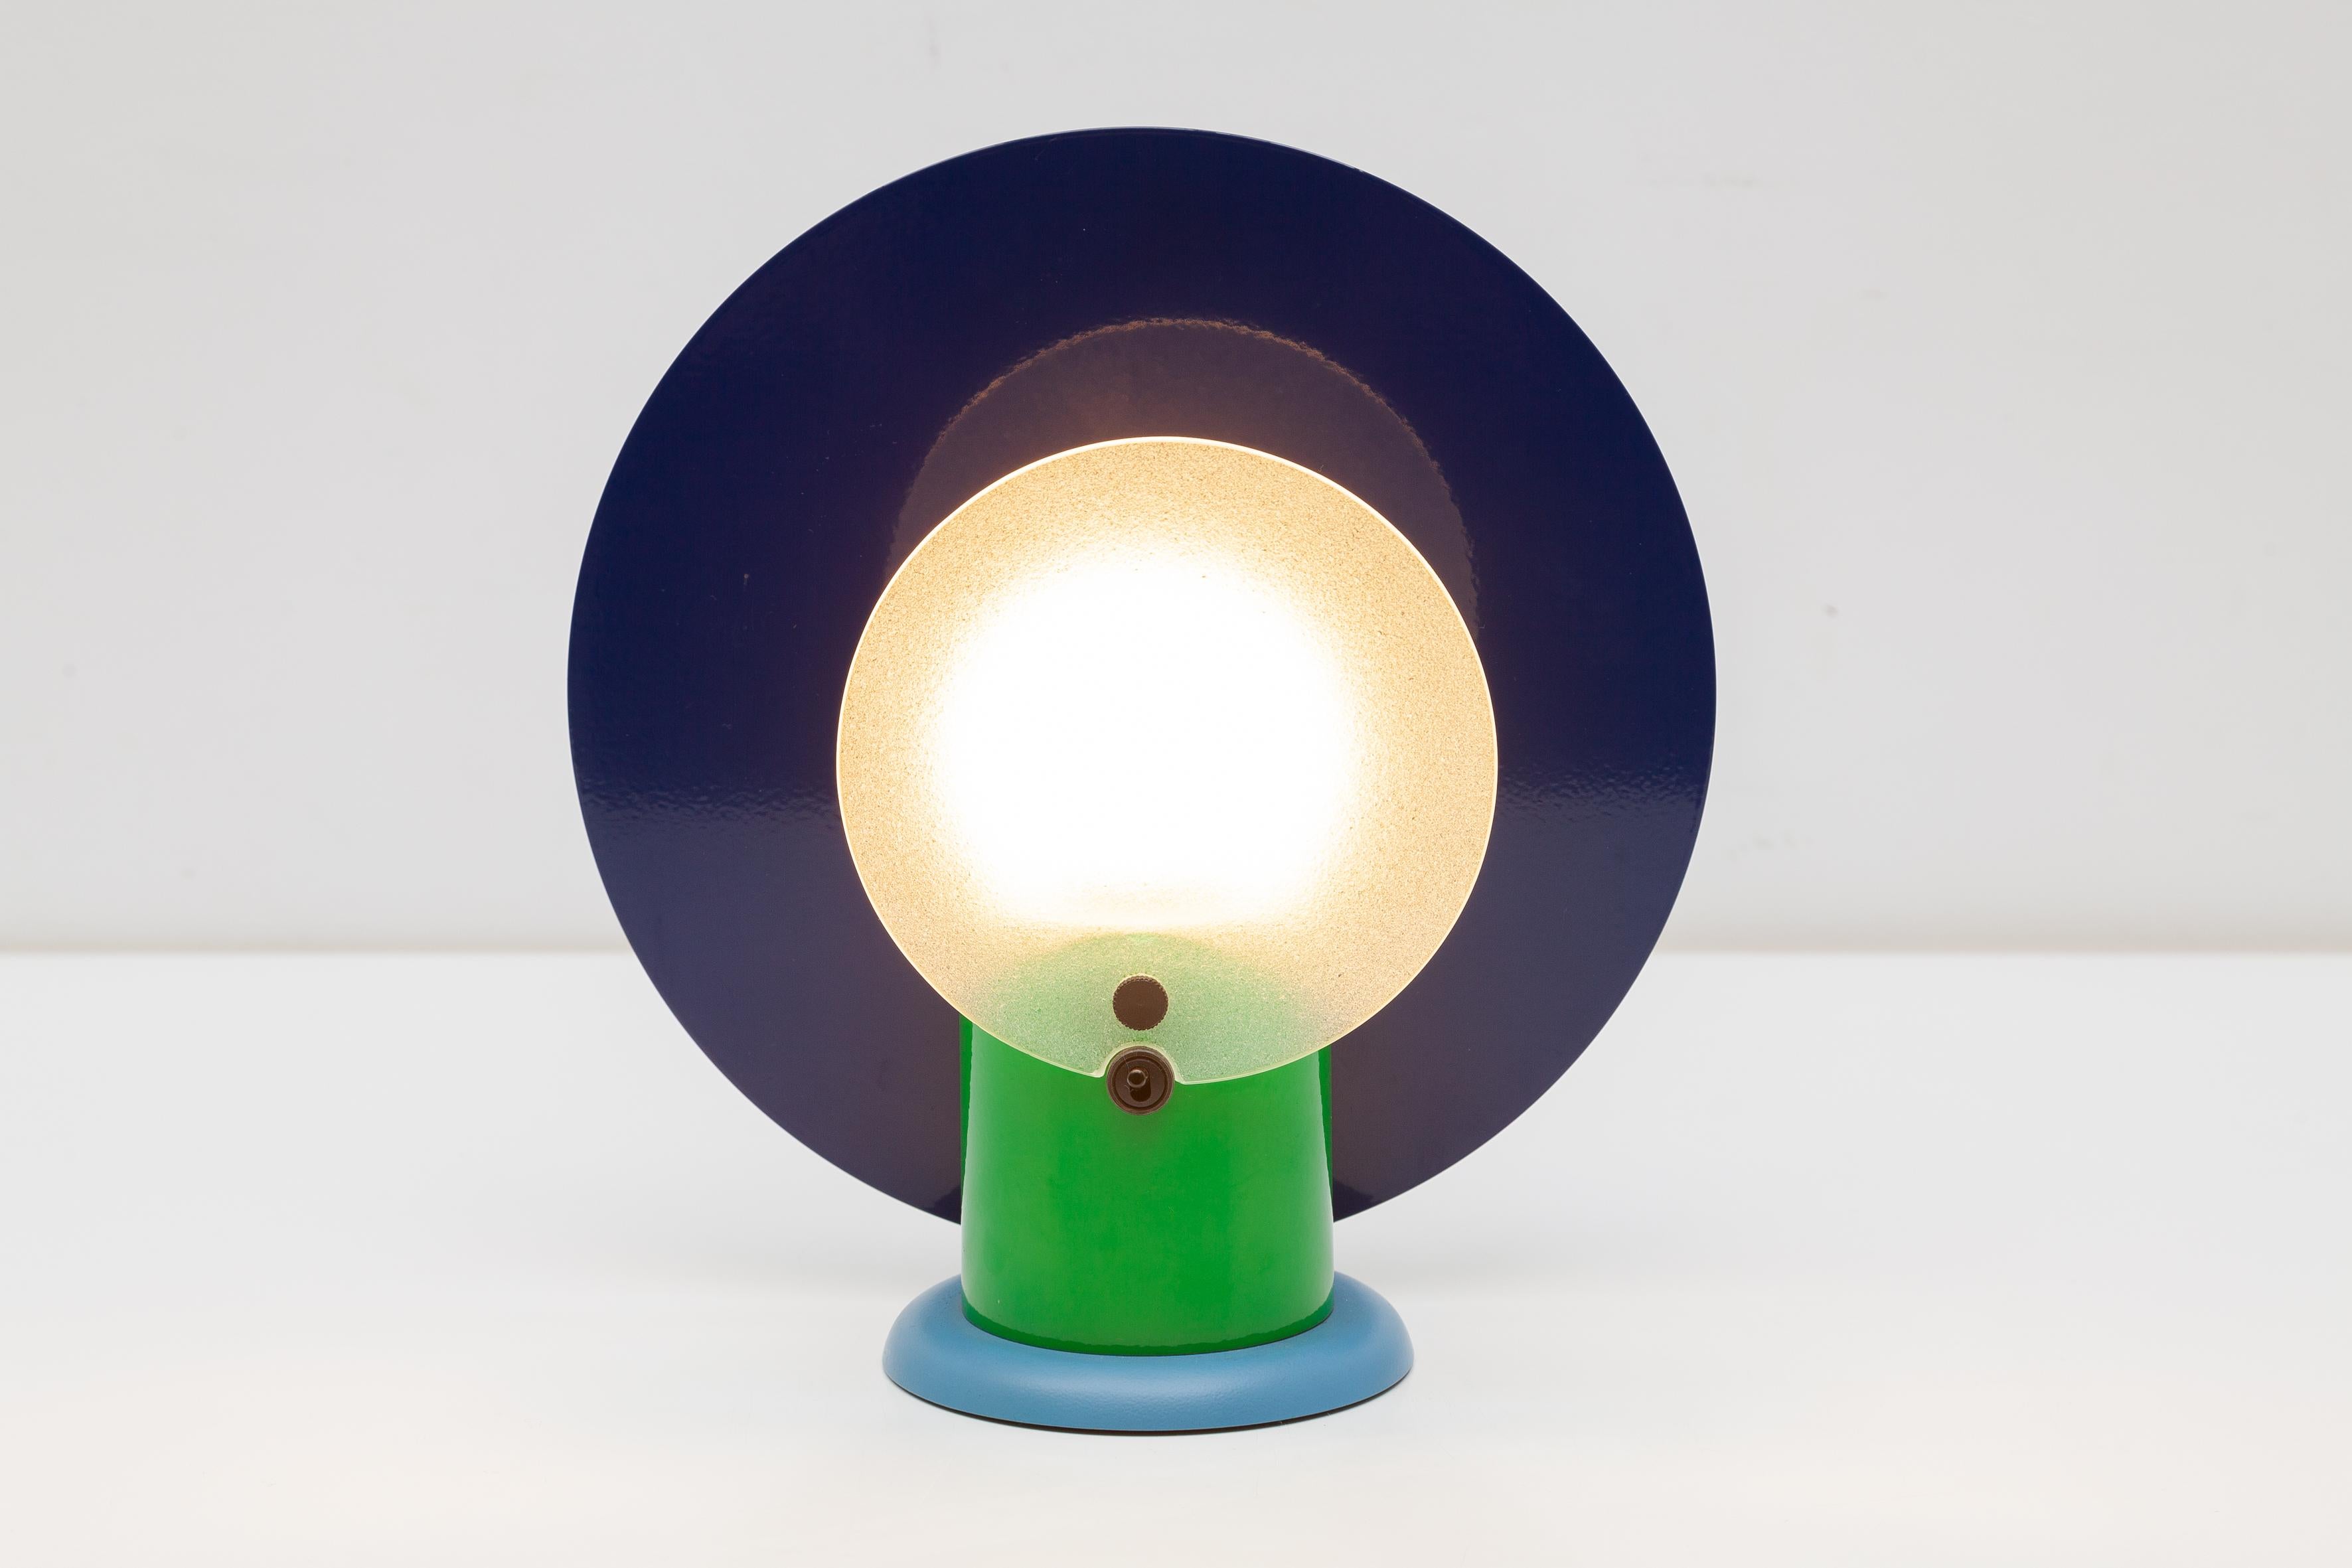 Vintage table lamp by Beiffeplast, Italy. Bold 1980s design with blue and green enameled metal and textured glass shade. Spiky rubberized light bulb.Dimensions:27 x 25 x 12 cm.Perfect Condition.